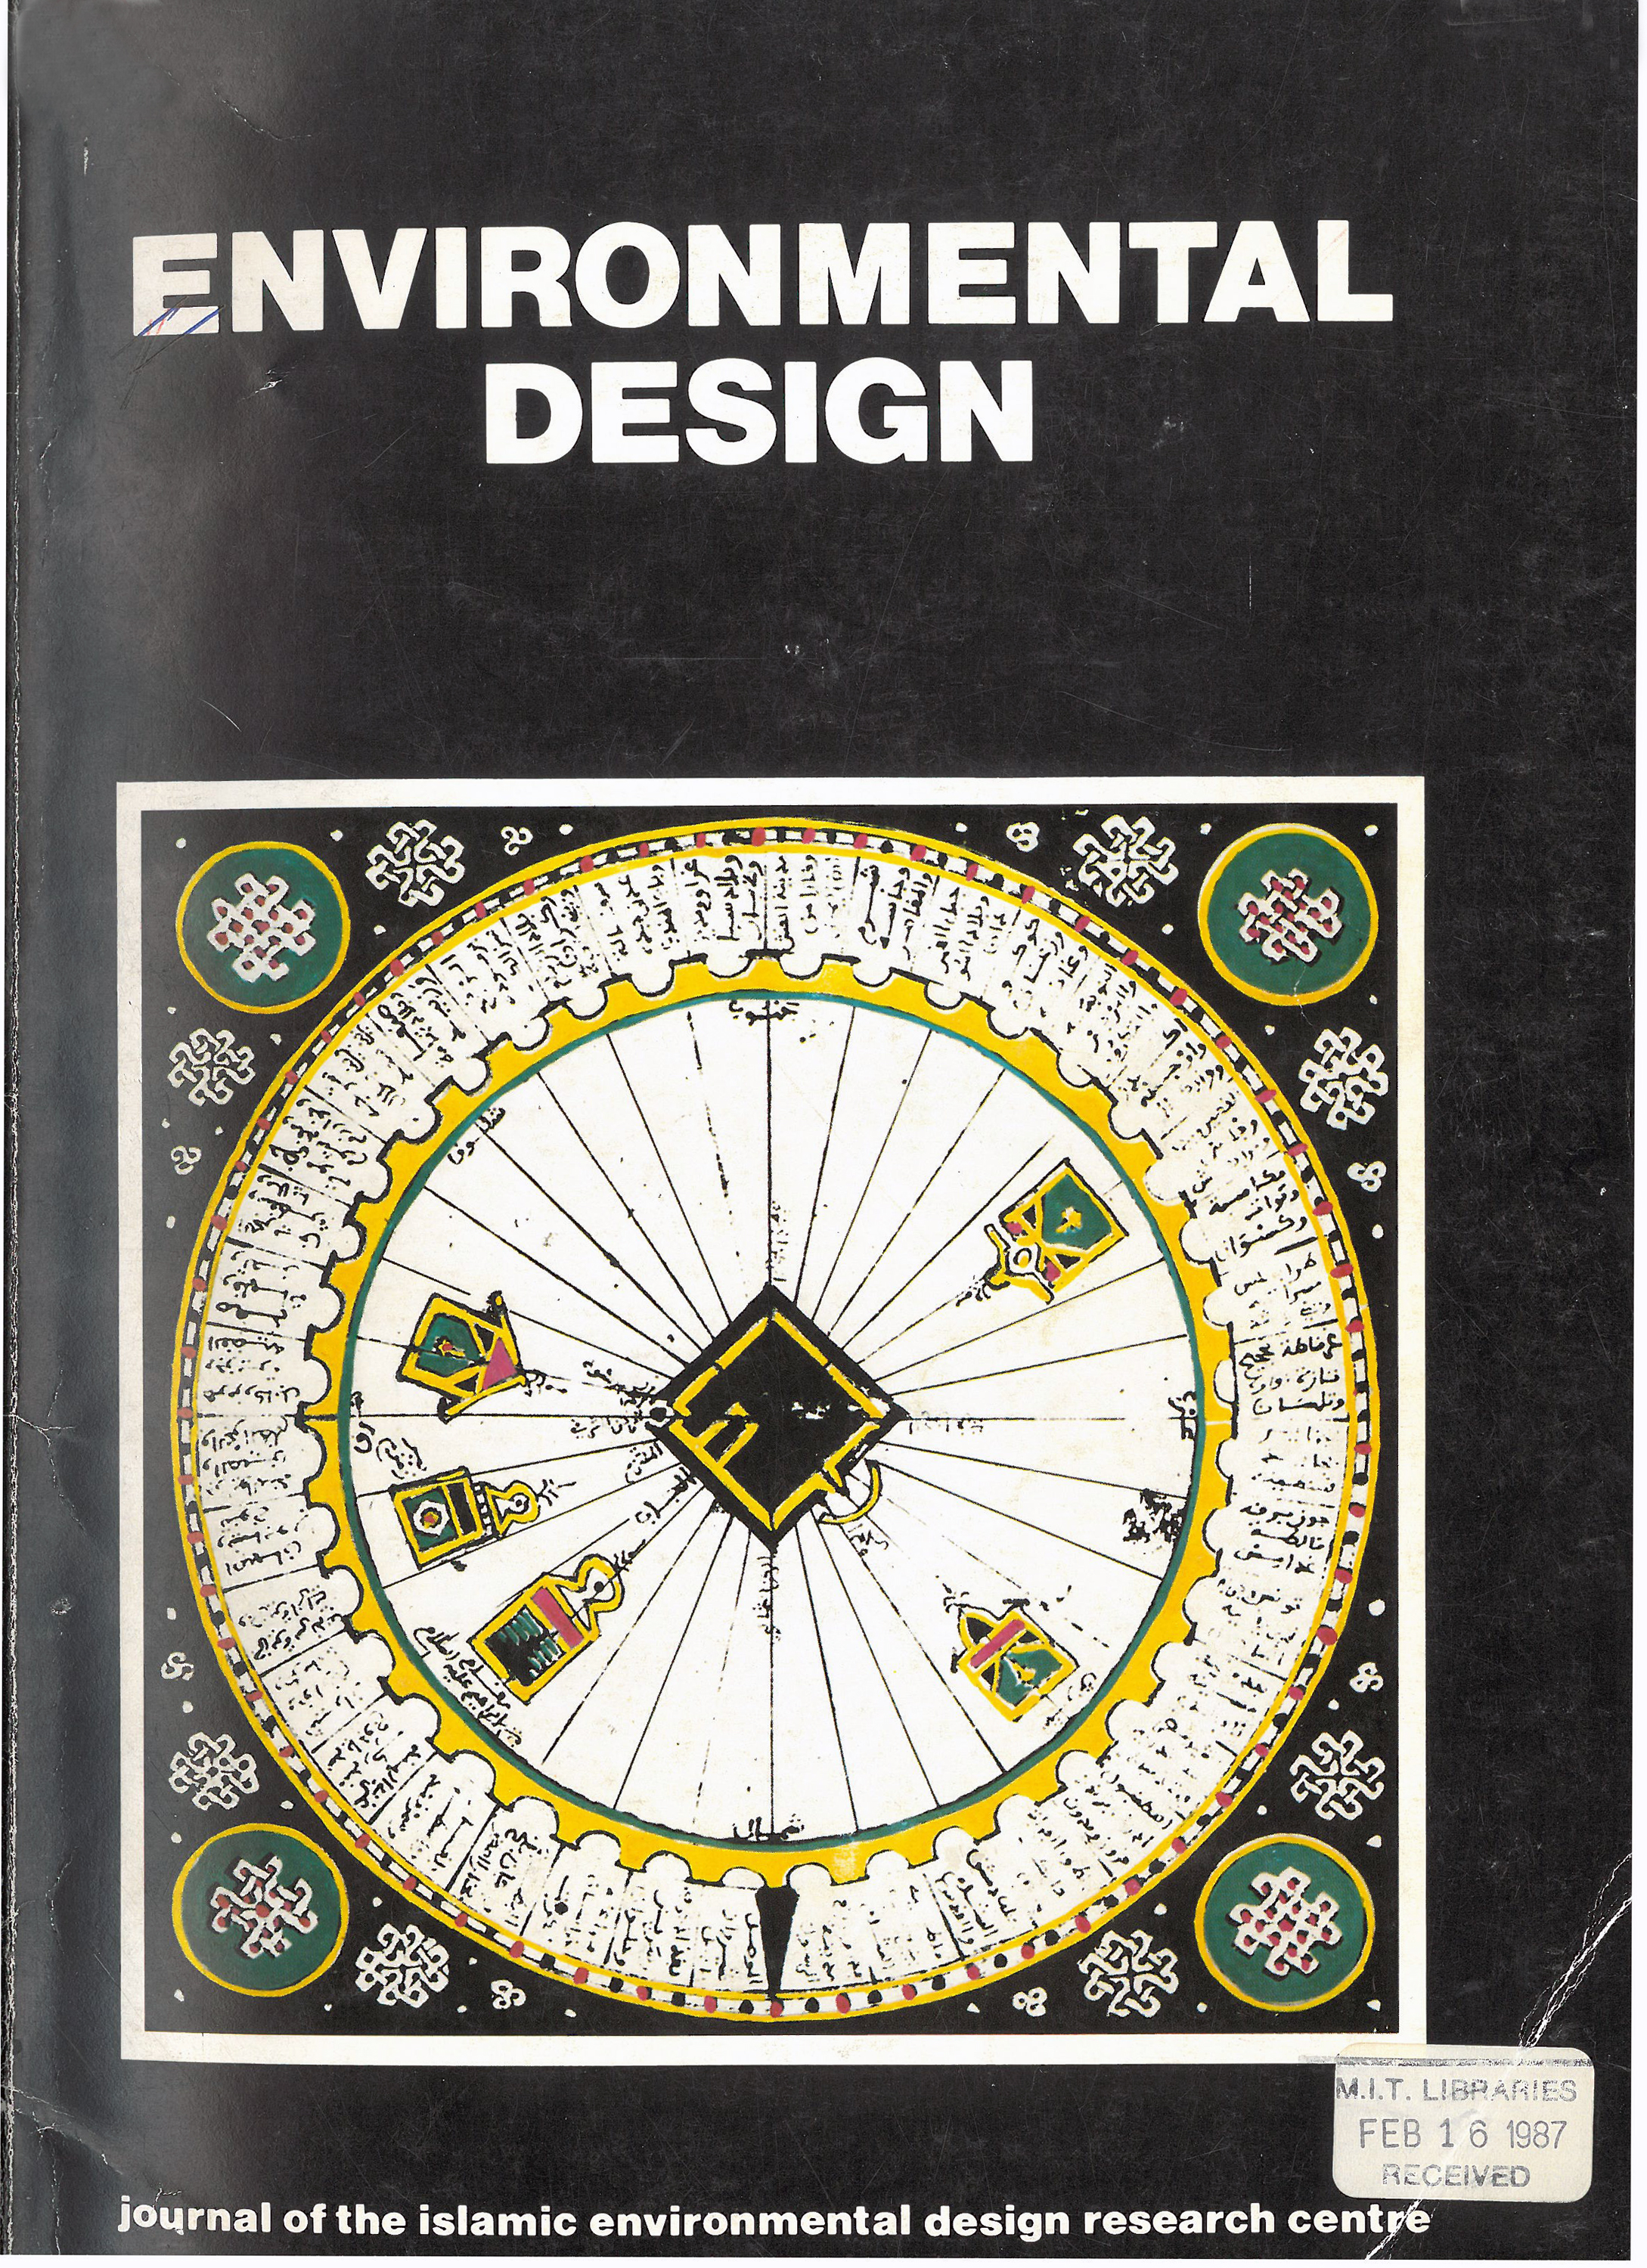 Attilio Petruccioli - Environmental Design was a series edited by Attilio Petruccioli, that promoted and coordinated higher studies and research in the field of architecture, and urban and rural planning pertaining to the Islamic world. With a particular focus on the interface between people and their habitat, including housing, dwellings and settlement patterns, this journal was committed to realizing certain goals: an effective interplay between the different areas in urban studies, and a solid relationship of collaboration and exchange of technical expertise between major institutions committed to similar research.